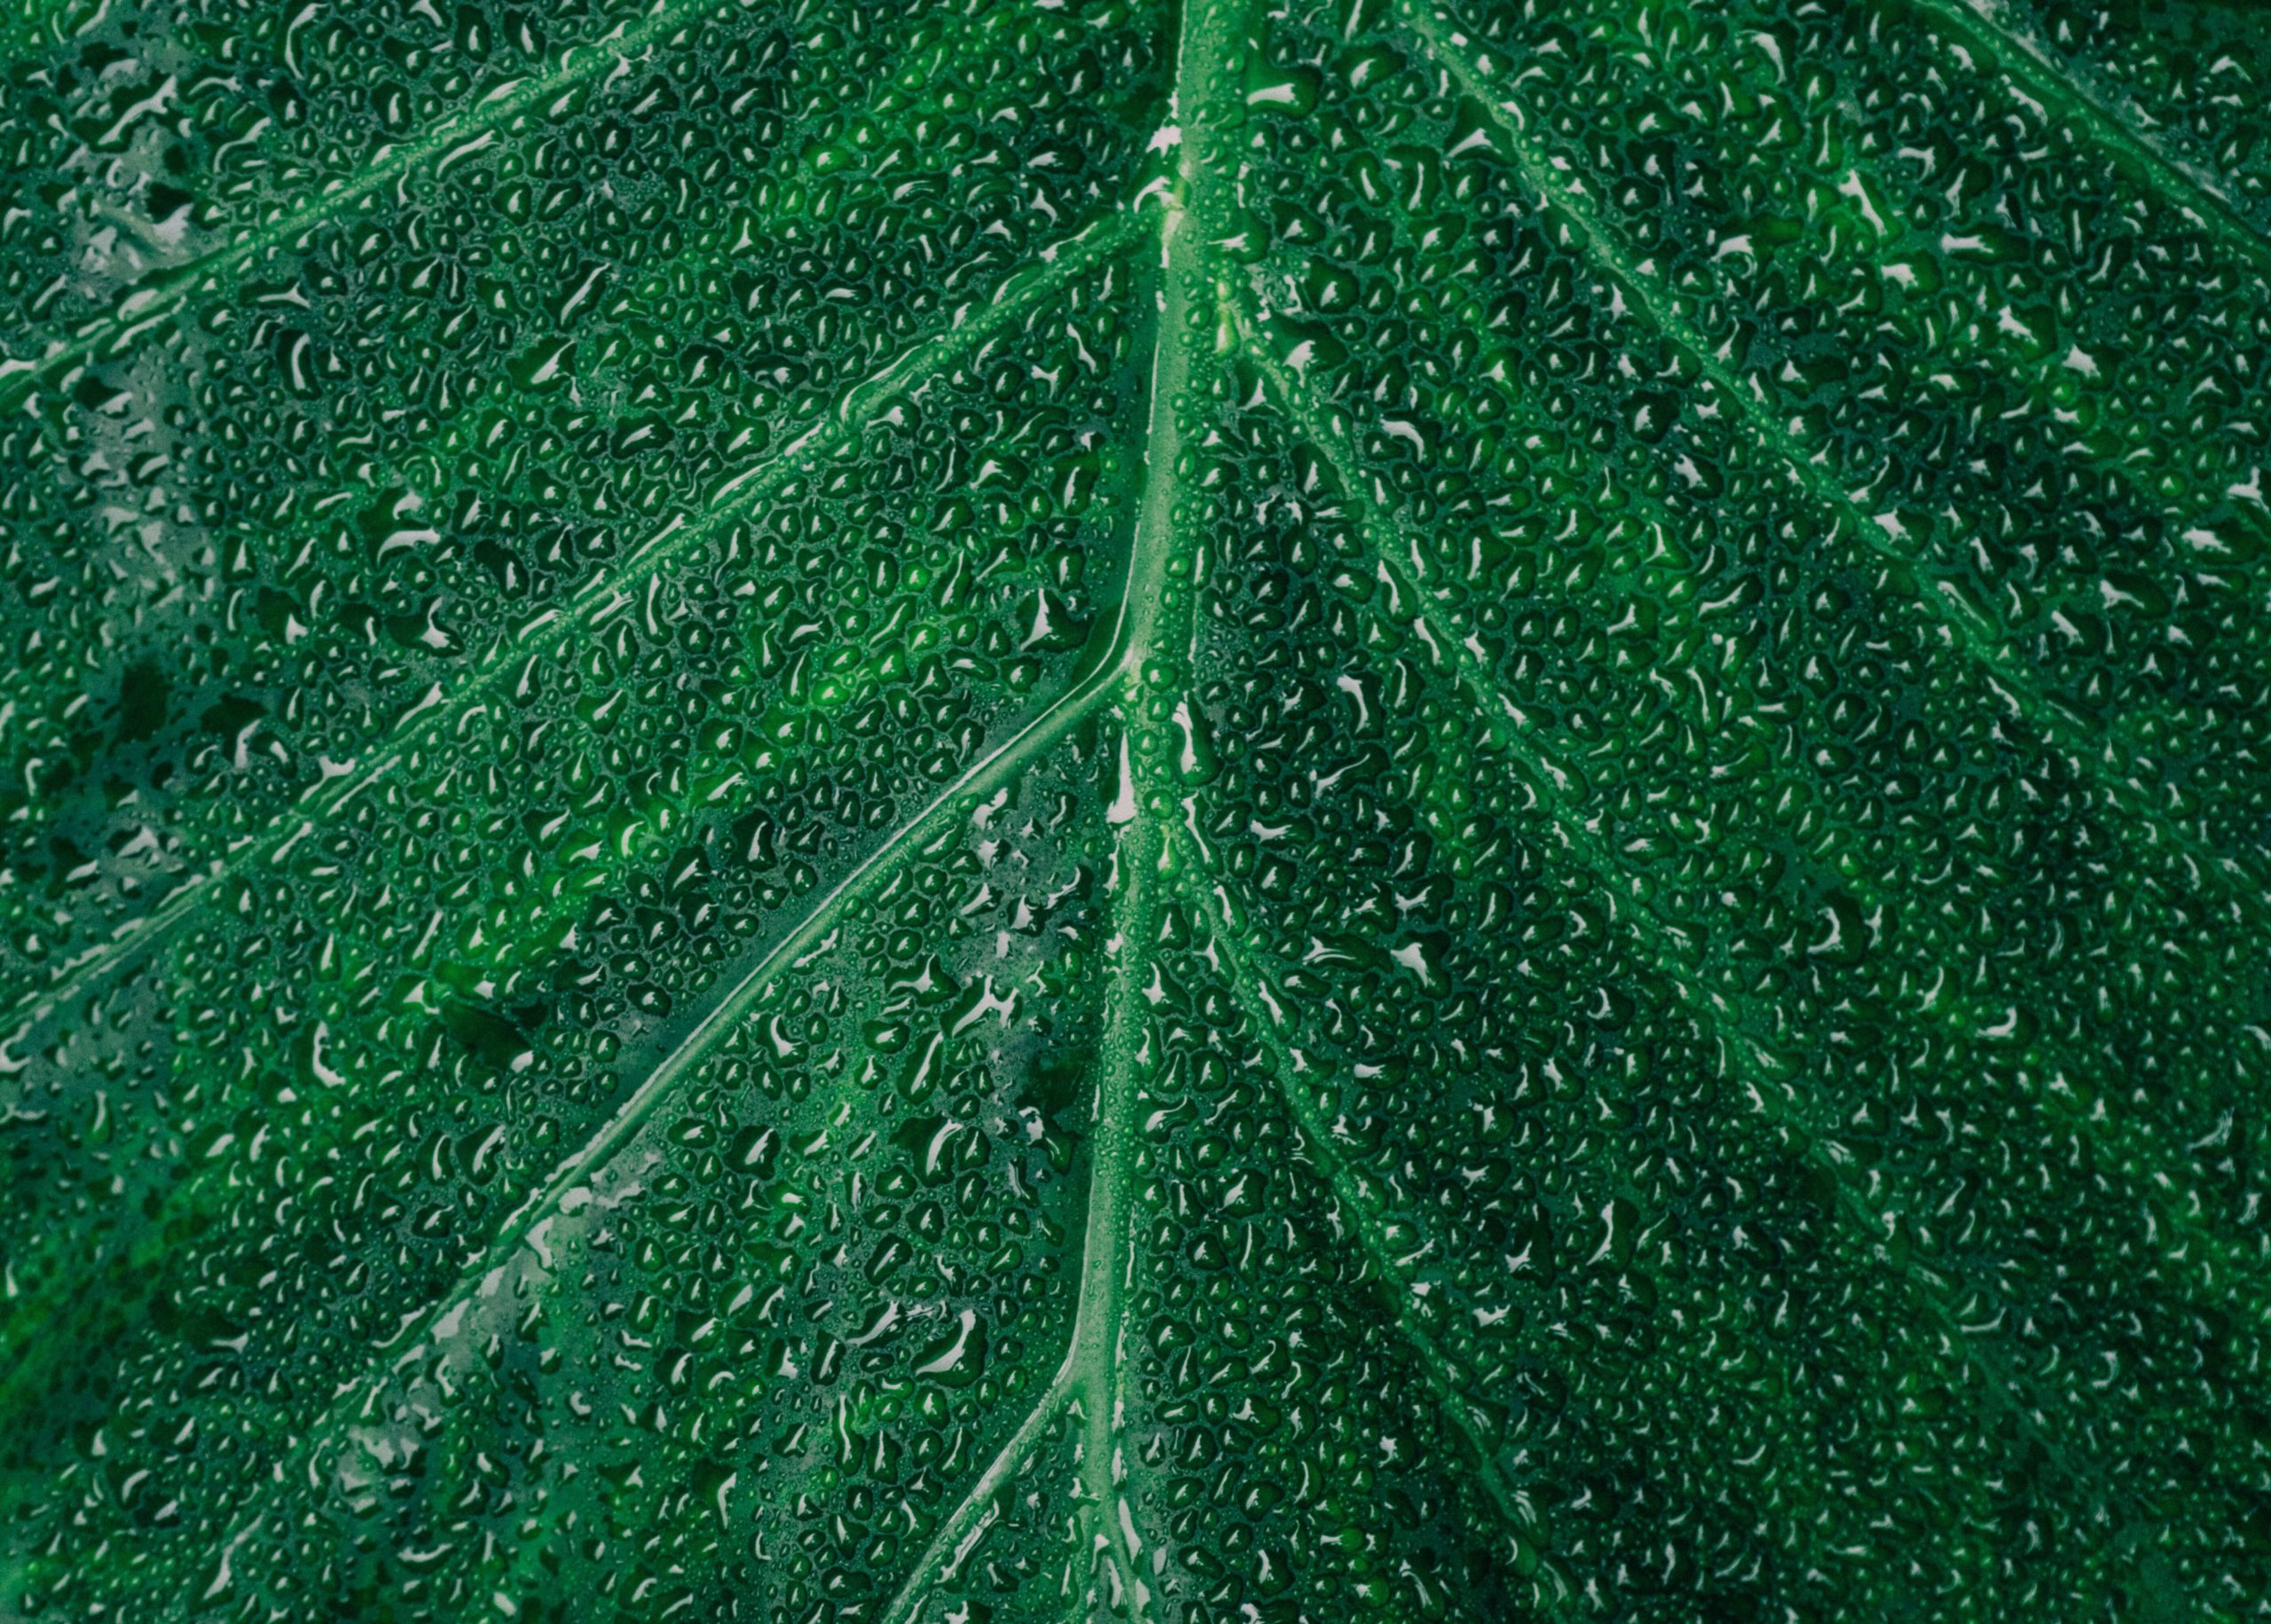 extreme close-up of green leaf